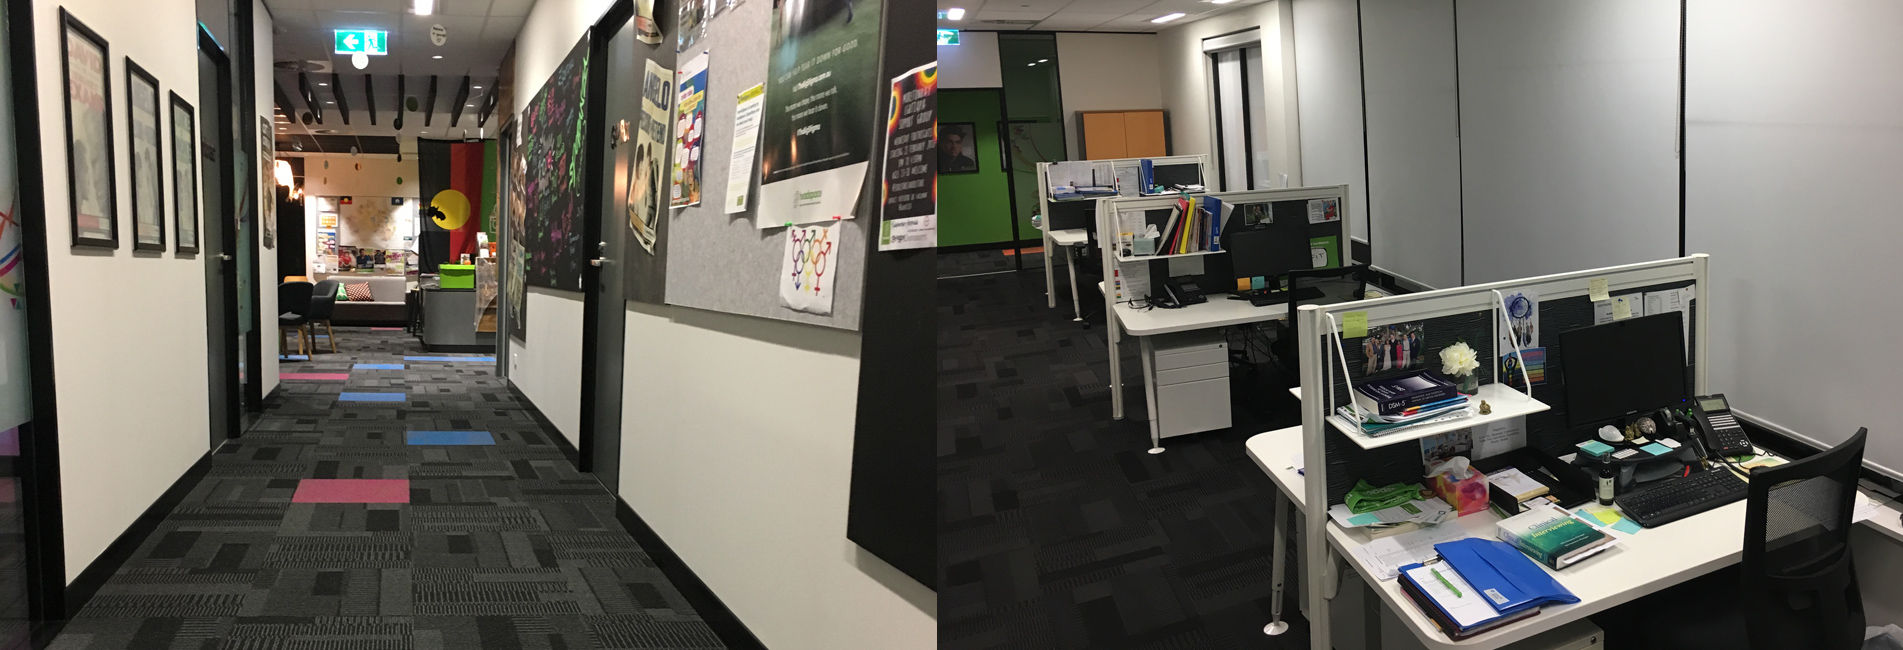 Office Cleaning Lawnton, Commercial Cleaning QLD, Vinyl Floor Sealing Warner, Stripping & Sealing Bray Park, Child Care Cleaning Strathpine, Medical Centre Cleaning Joyner